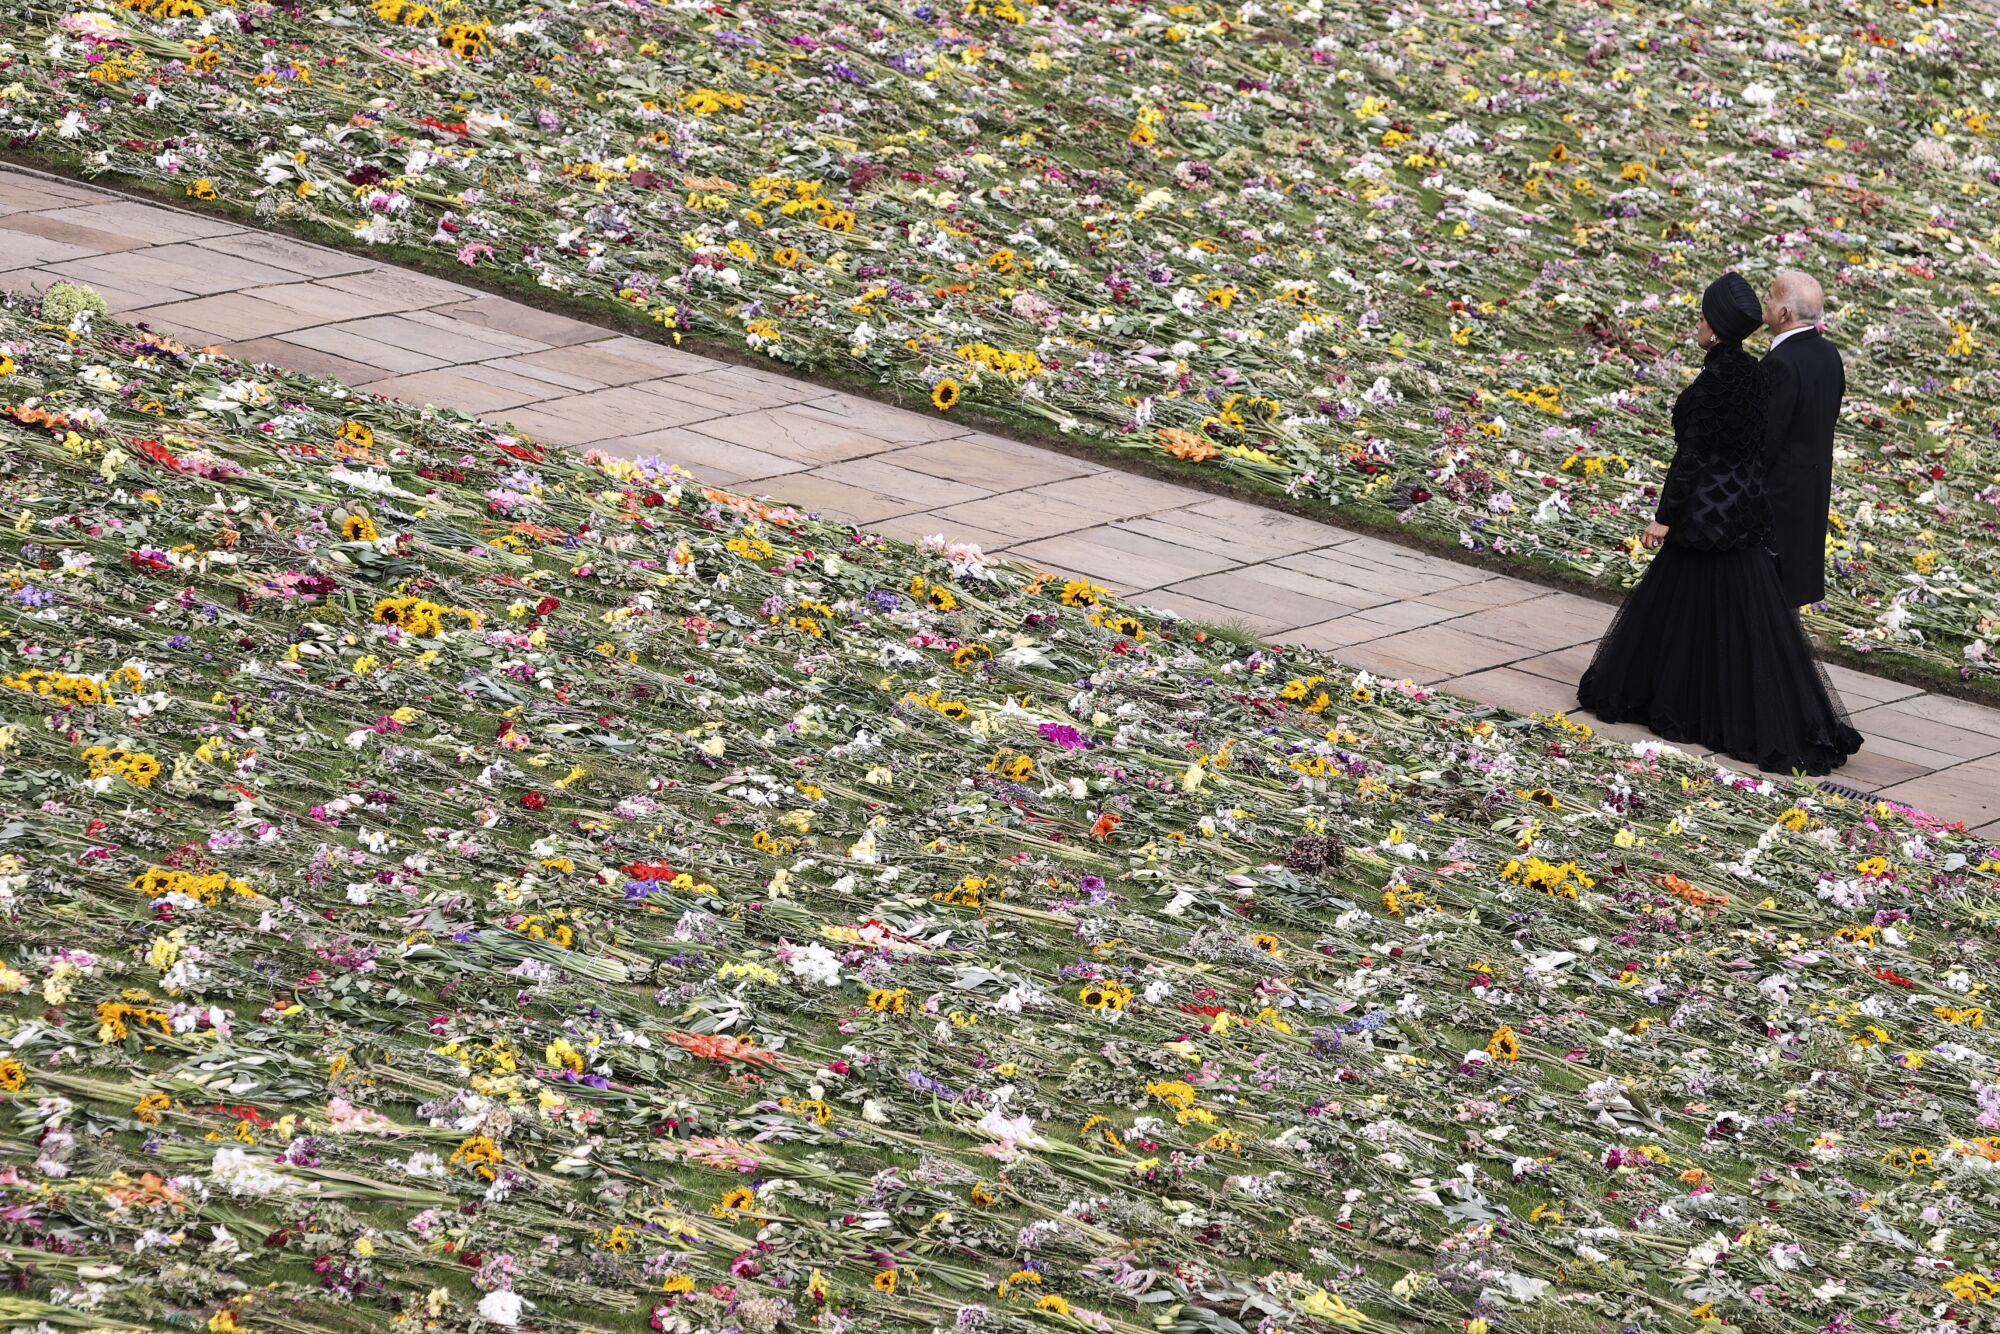 A man and woman dressed in black walk on a sidewalk past a lawn covered in flowers.